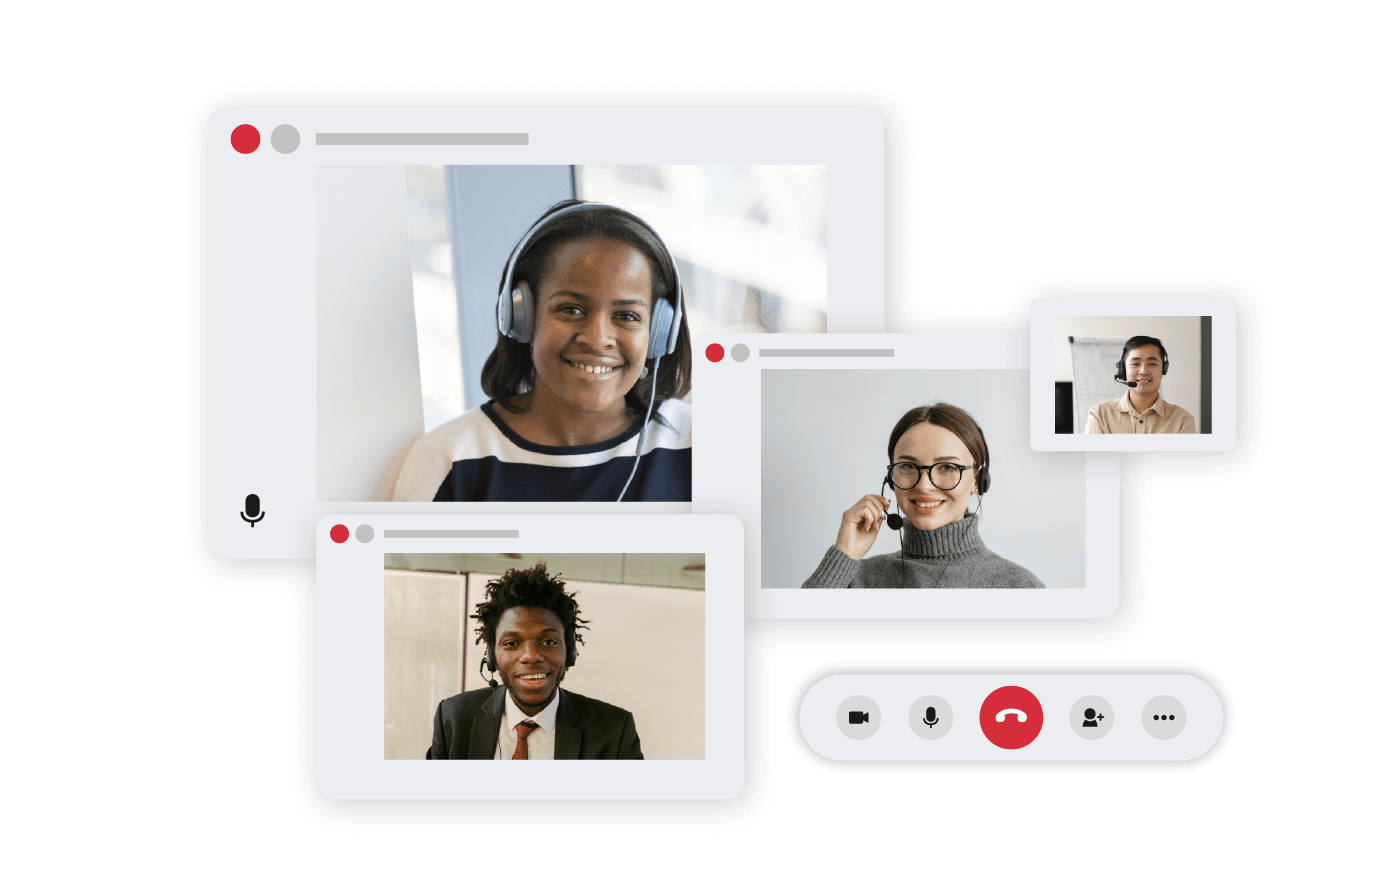 Four Employees on eConferencing Call